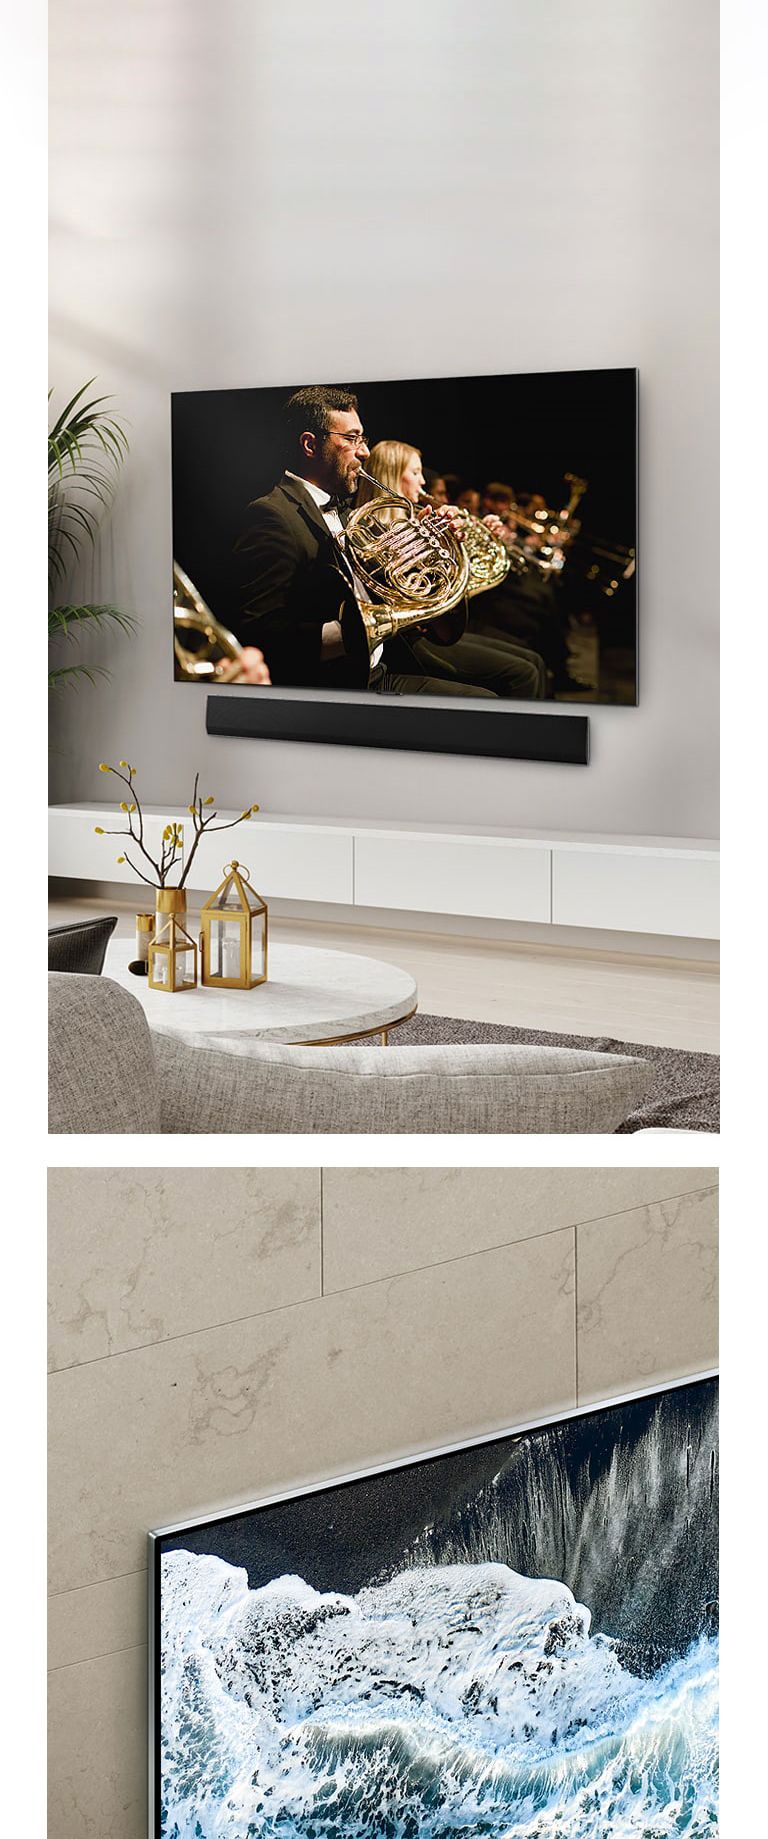 LG OLED TV, OLED G4 within an angled of perspective against a marbled wall showing how it merges against the wall. LG OLED TV, OLED G4 and an LG Soundbar in a clean living space flat against the wall with an orchestral performance playing on screen. 